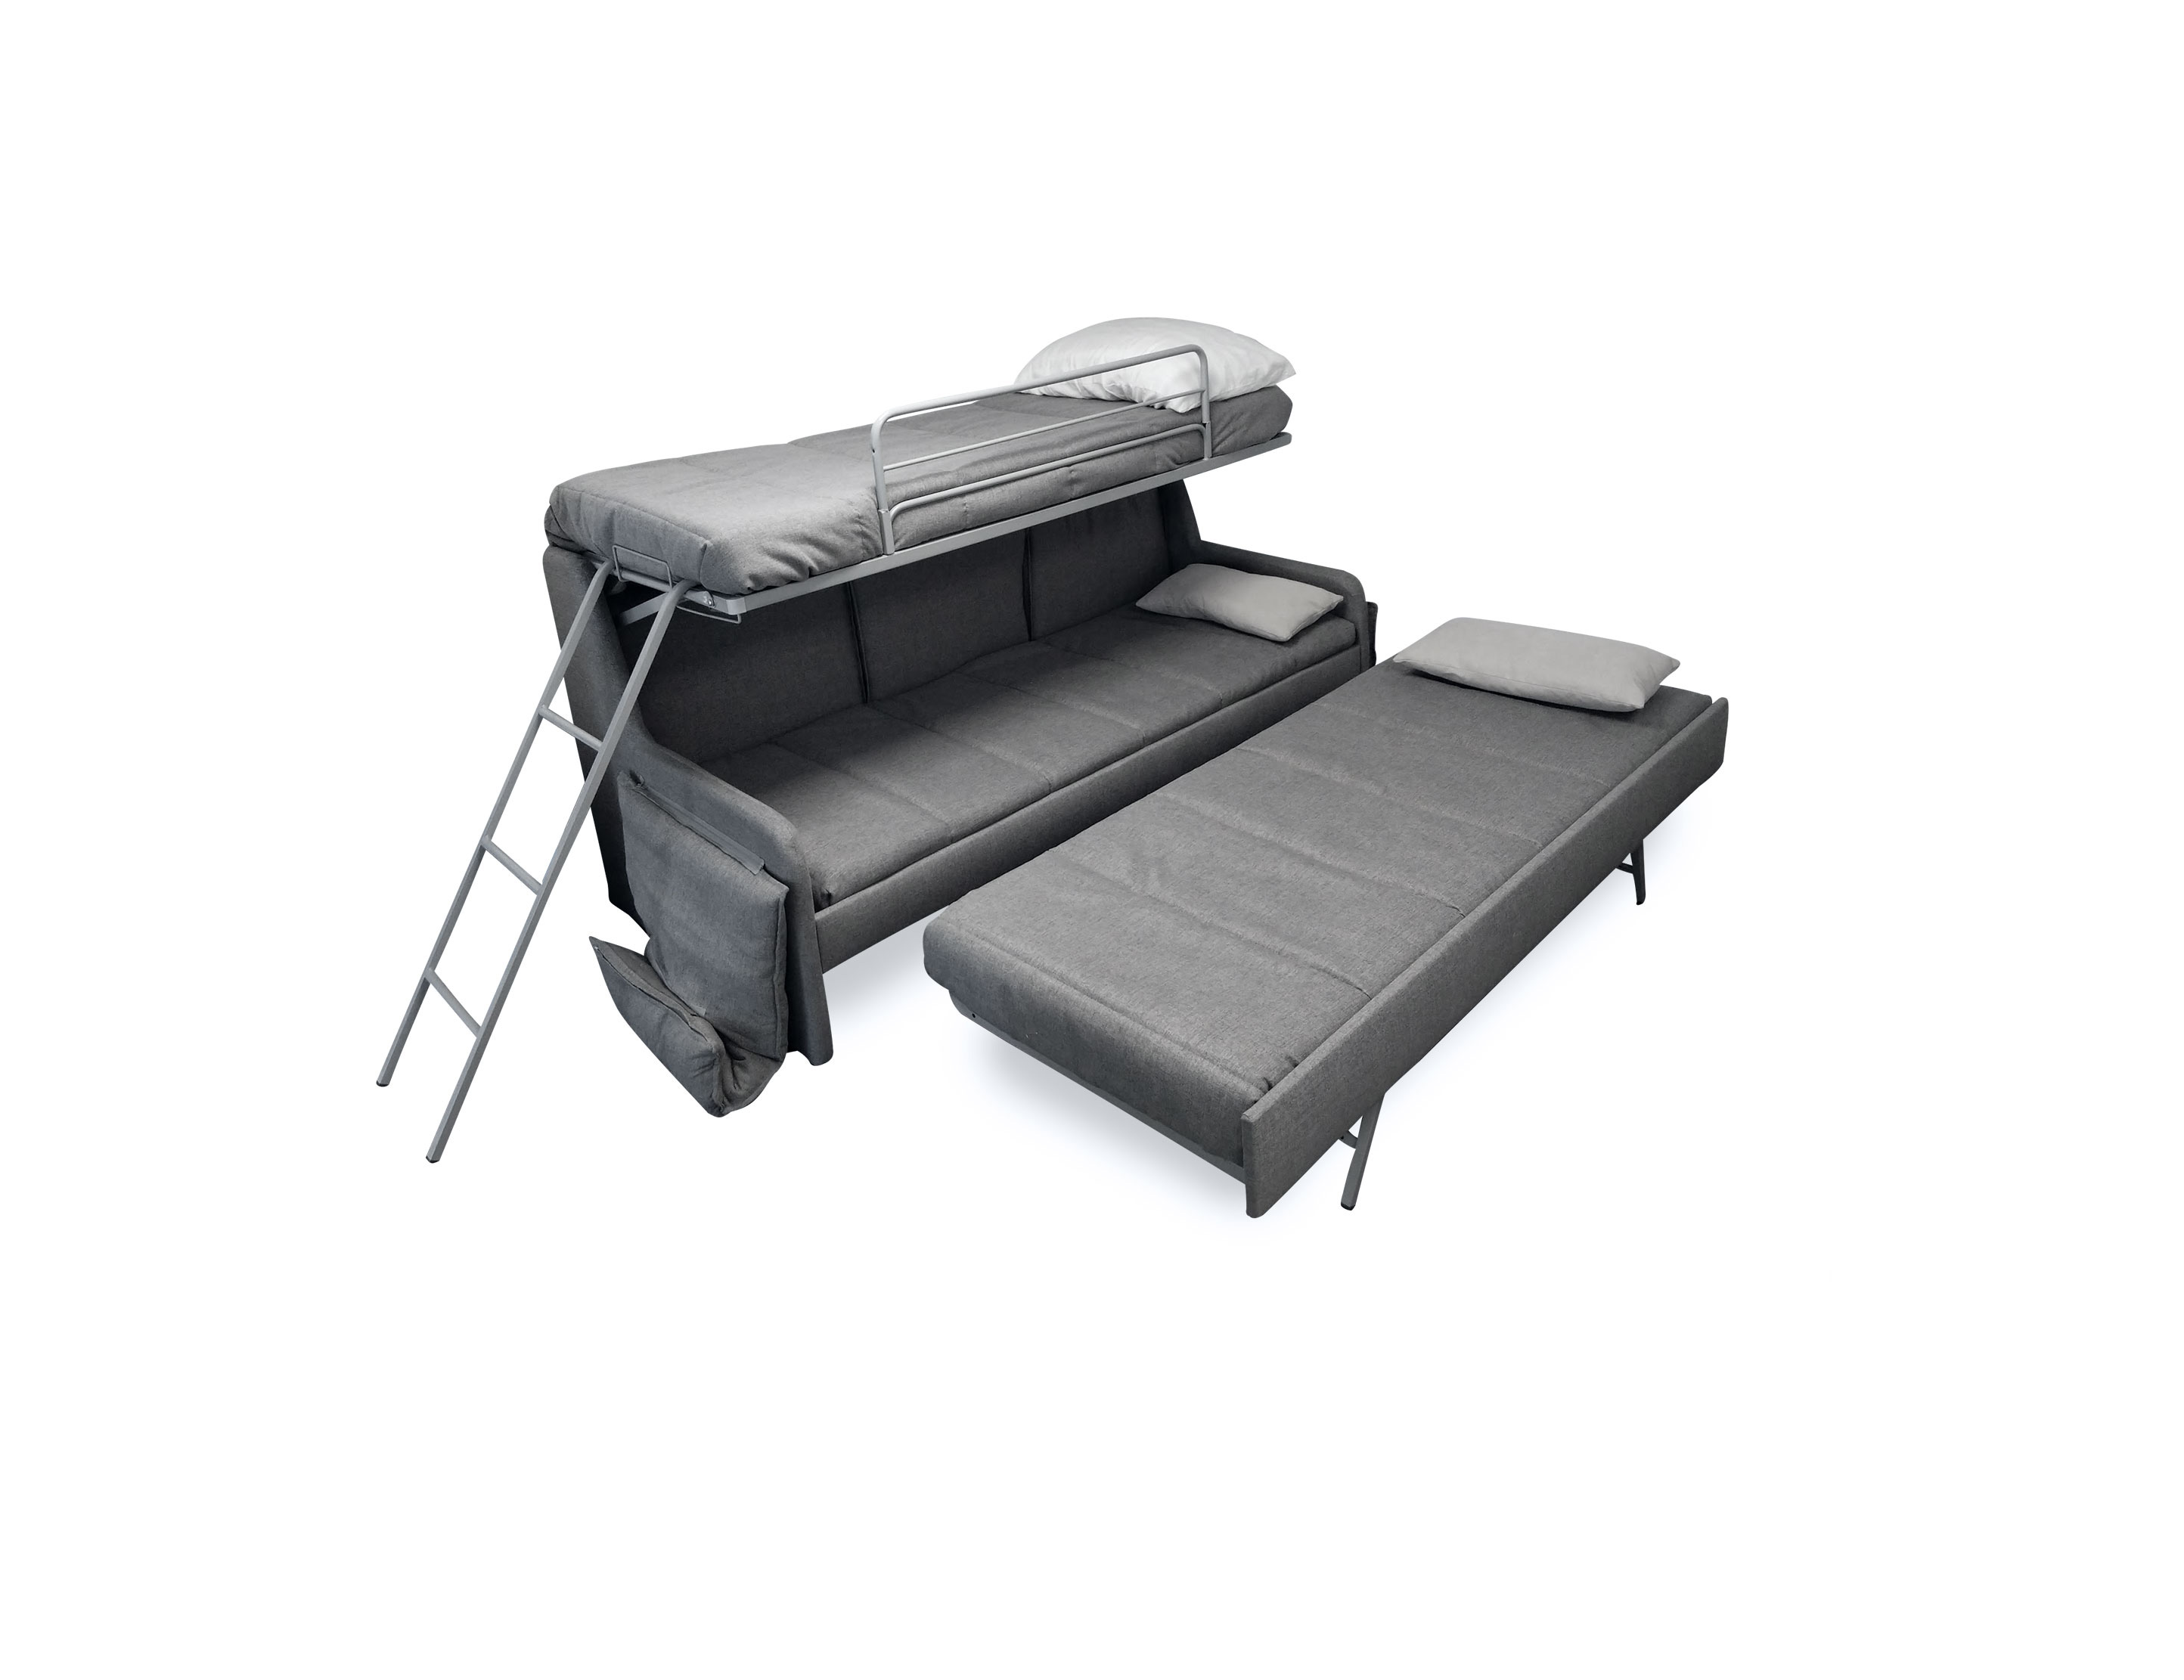 Transforming Sofa Bunk Bed Expand, Bunk Beds That Convert To Twin Beds